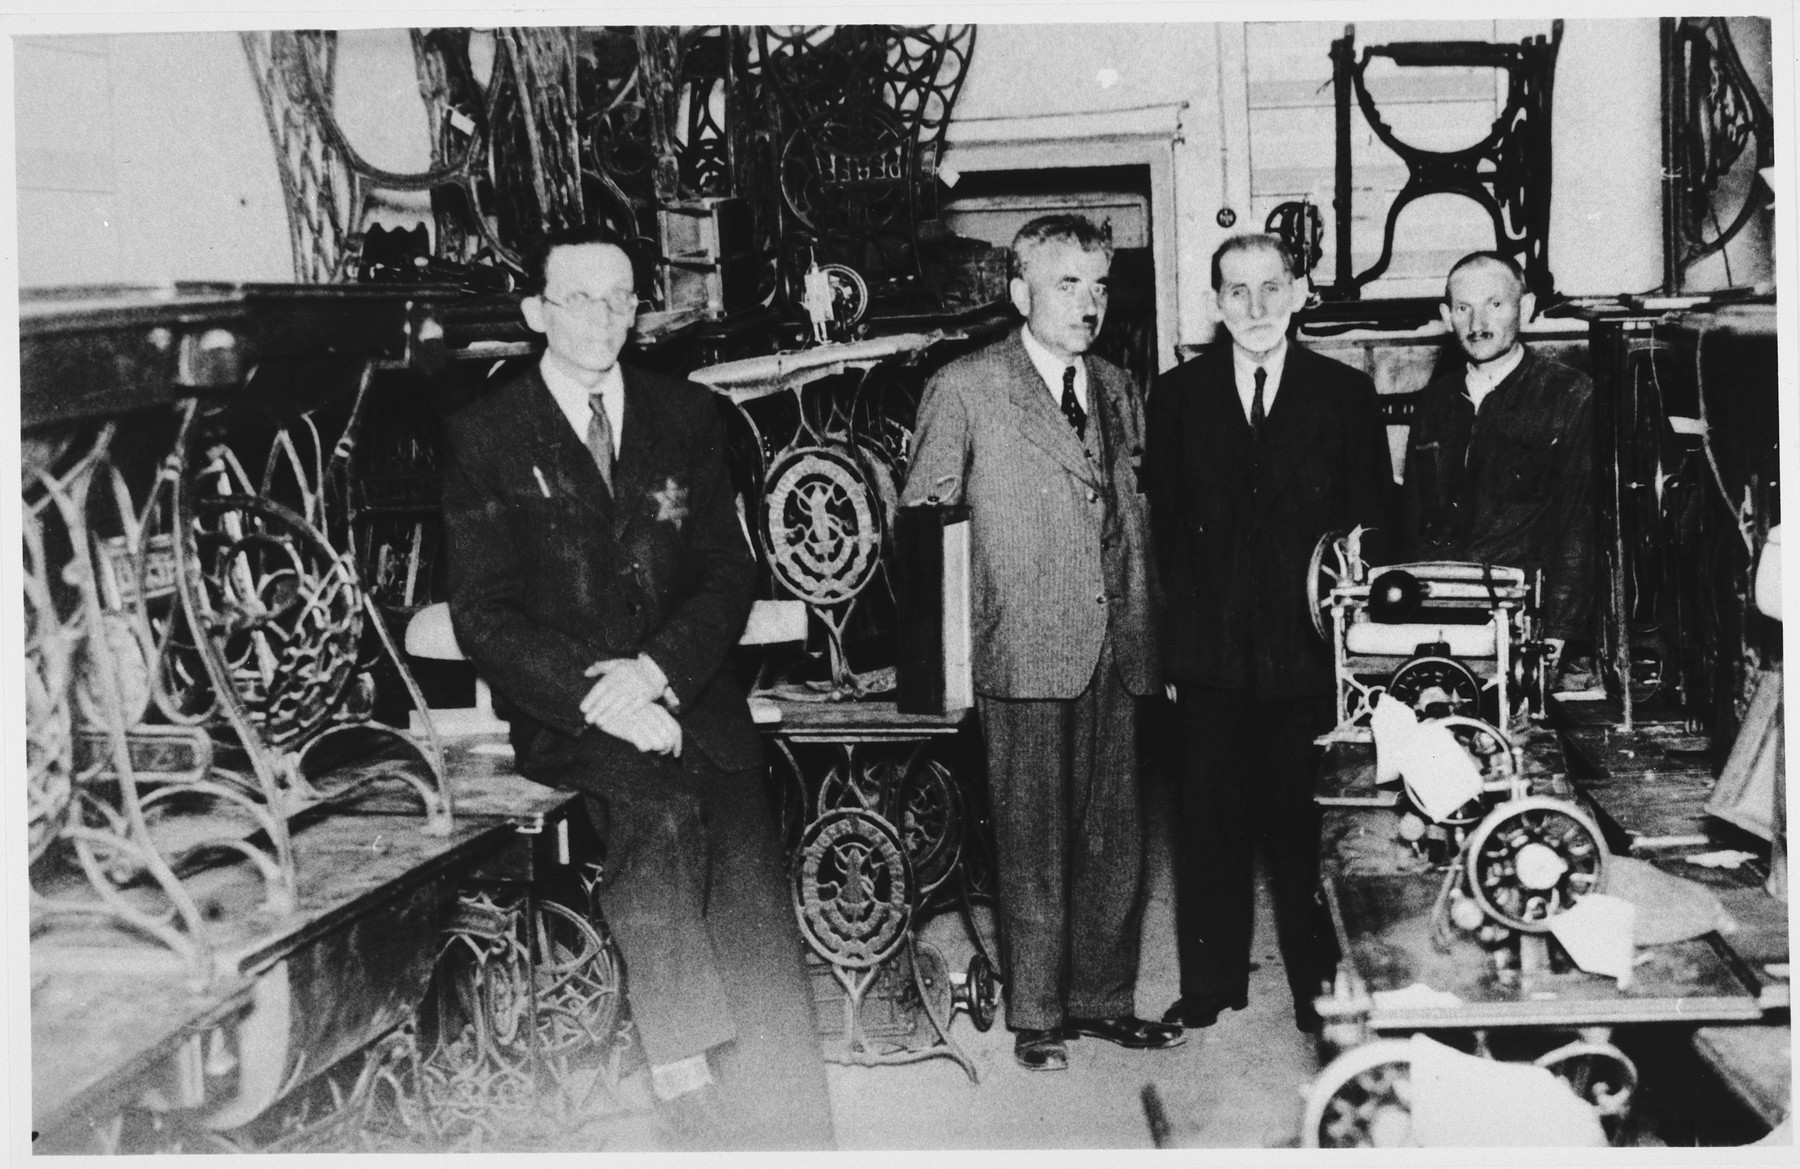 Four men wearing Jewish stars pose in a ghetto workshop filled with sewing machines.